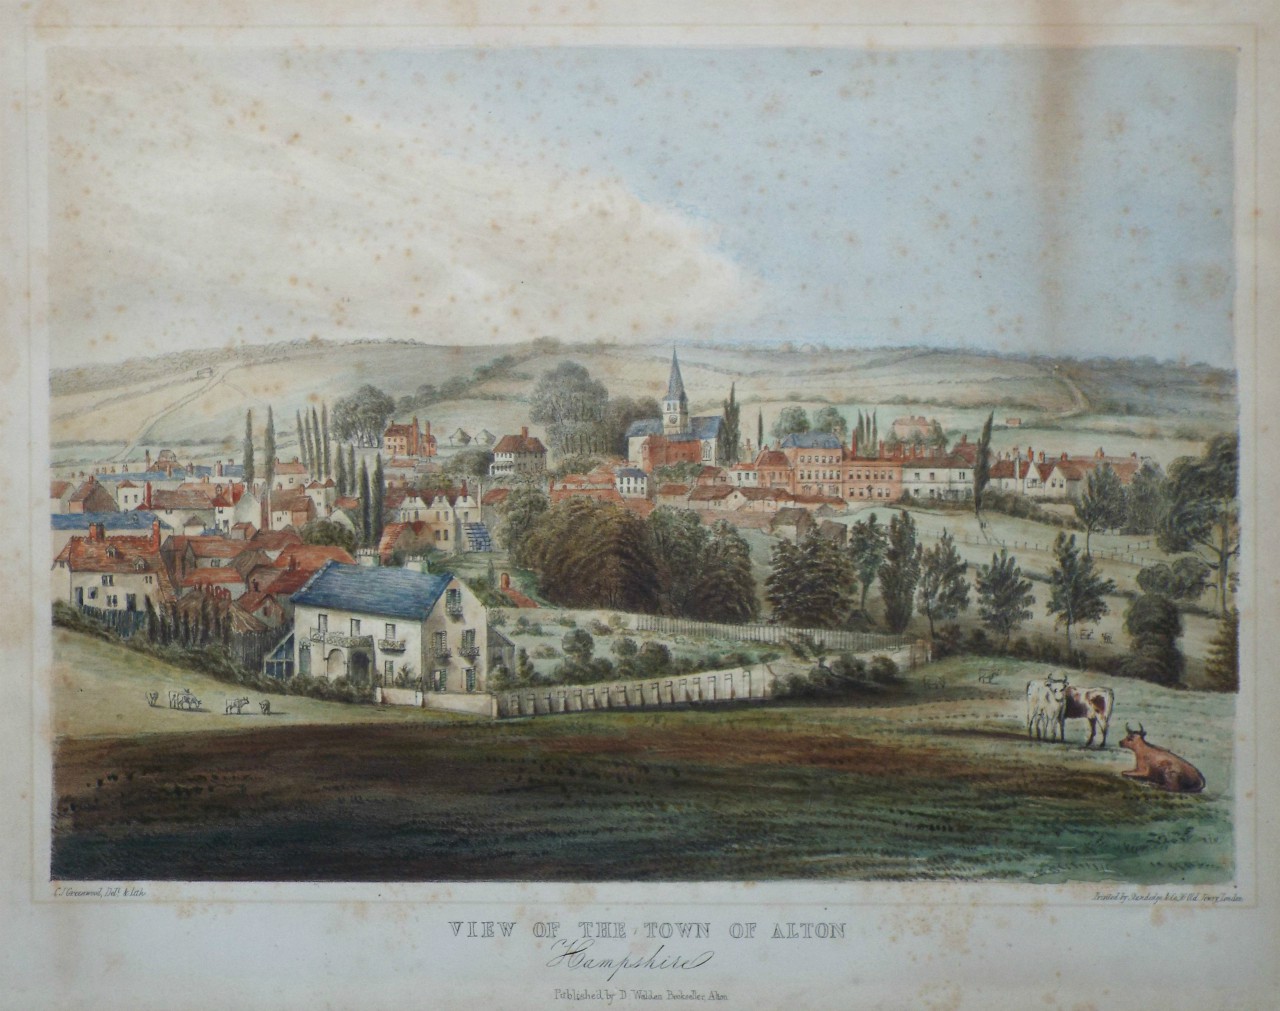 Lithograph - View of the Town of Alton Hampshire - Greenwood